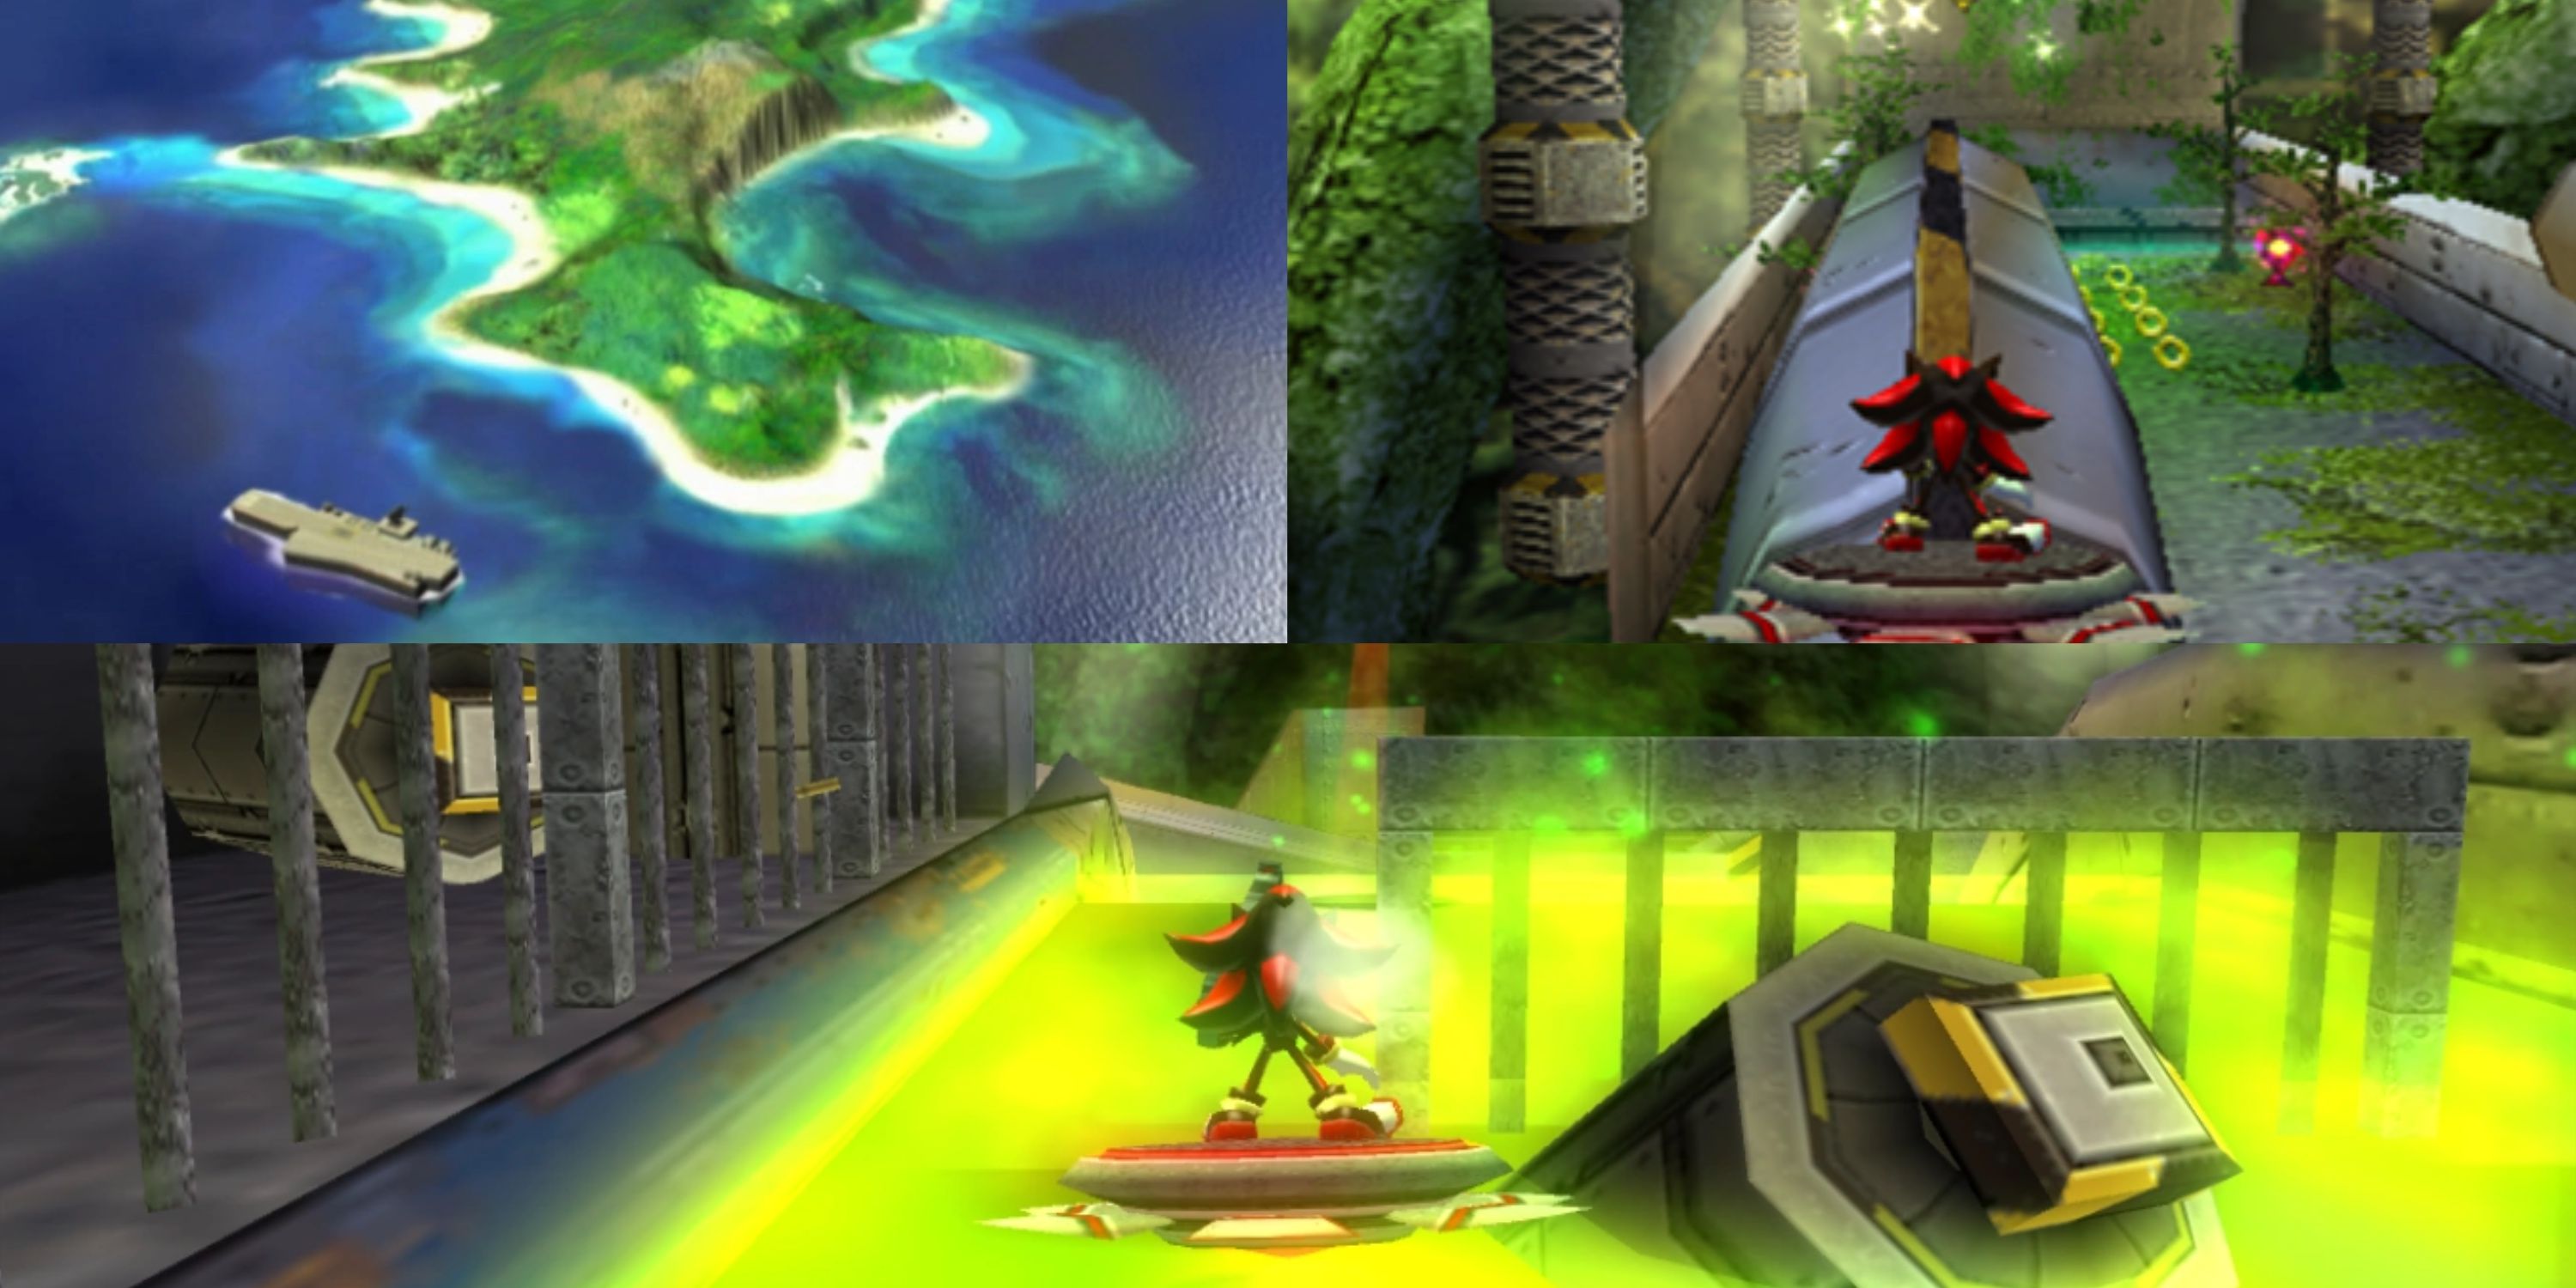 screenshots of Prison island from sonic adventure 2 and Shadow the Hedgehog